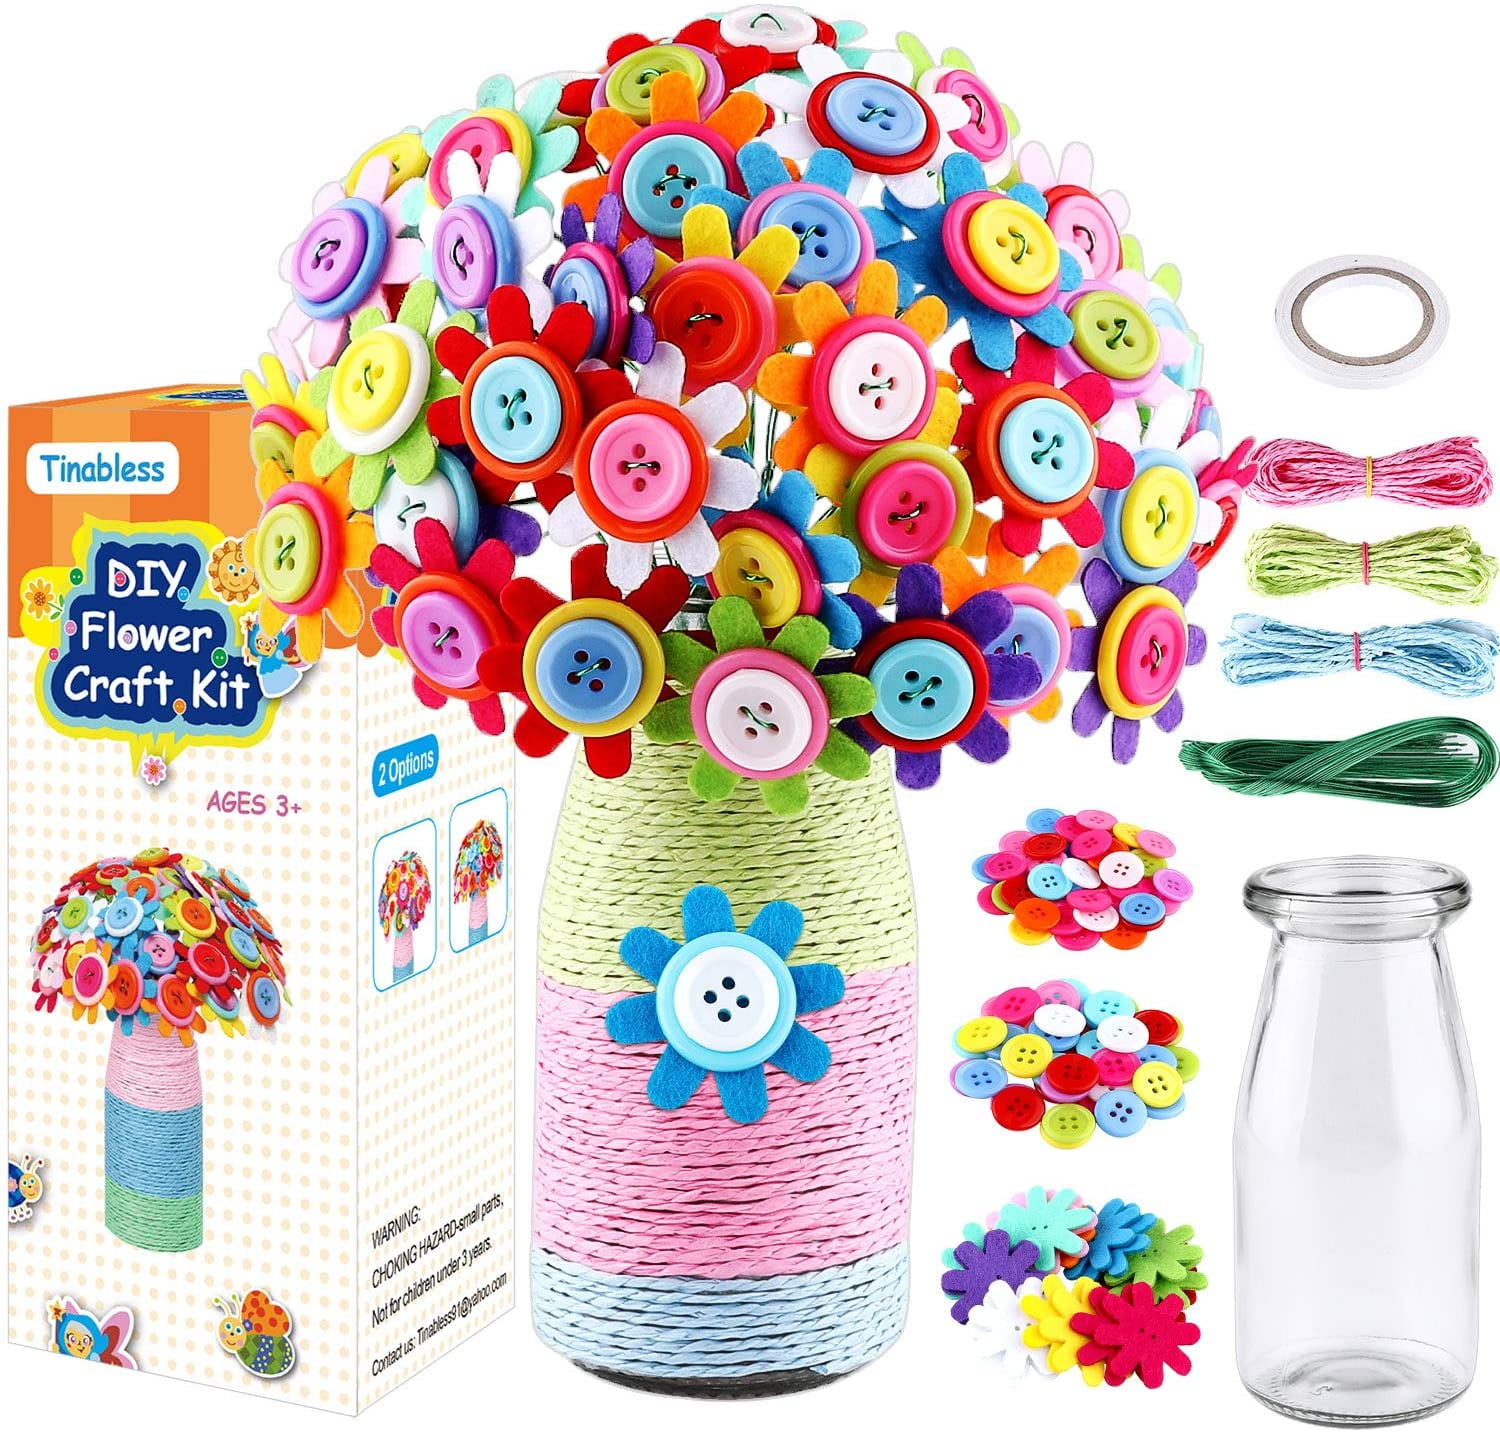 LNKOO Flower Craft Kit for Kids - Arts and Crafts Make Your Own Button